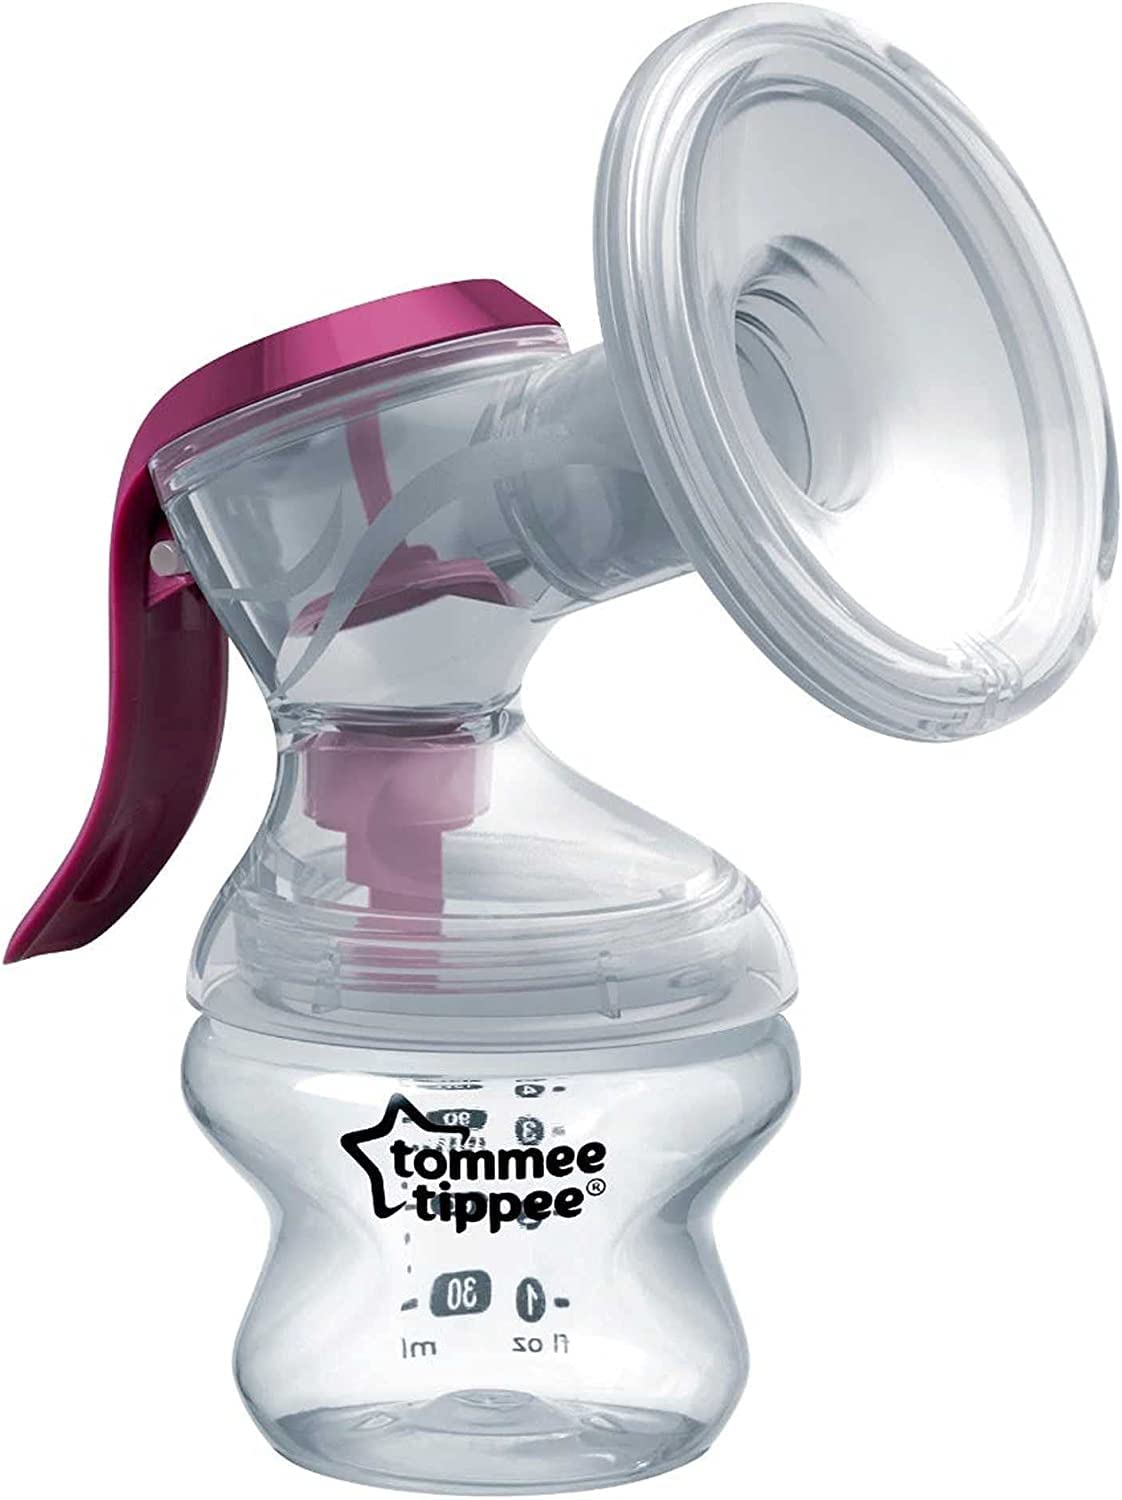 Tommee Tippee Made for Me Manual Breast Pump with soft, cushioned silicone cup and narrow neck for hand strain reduction